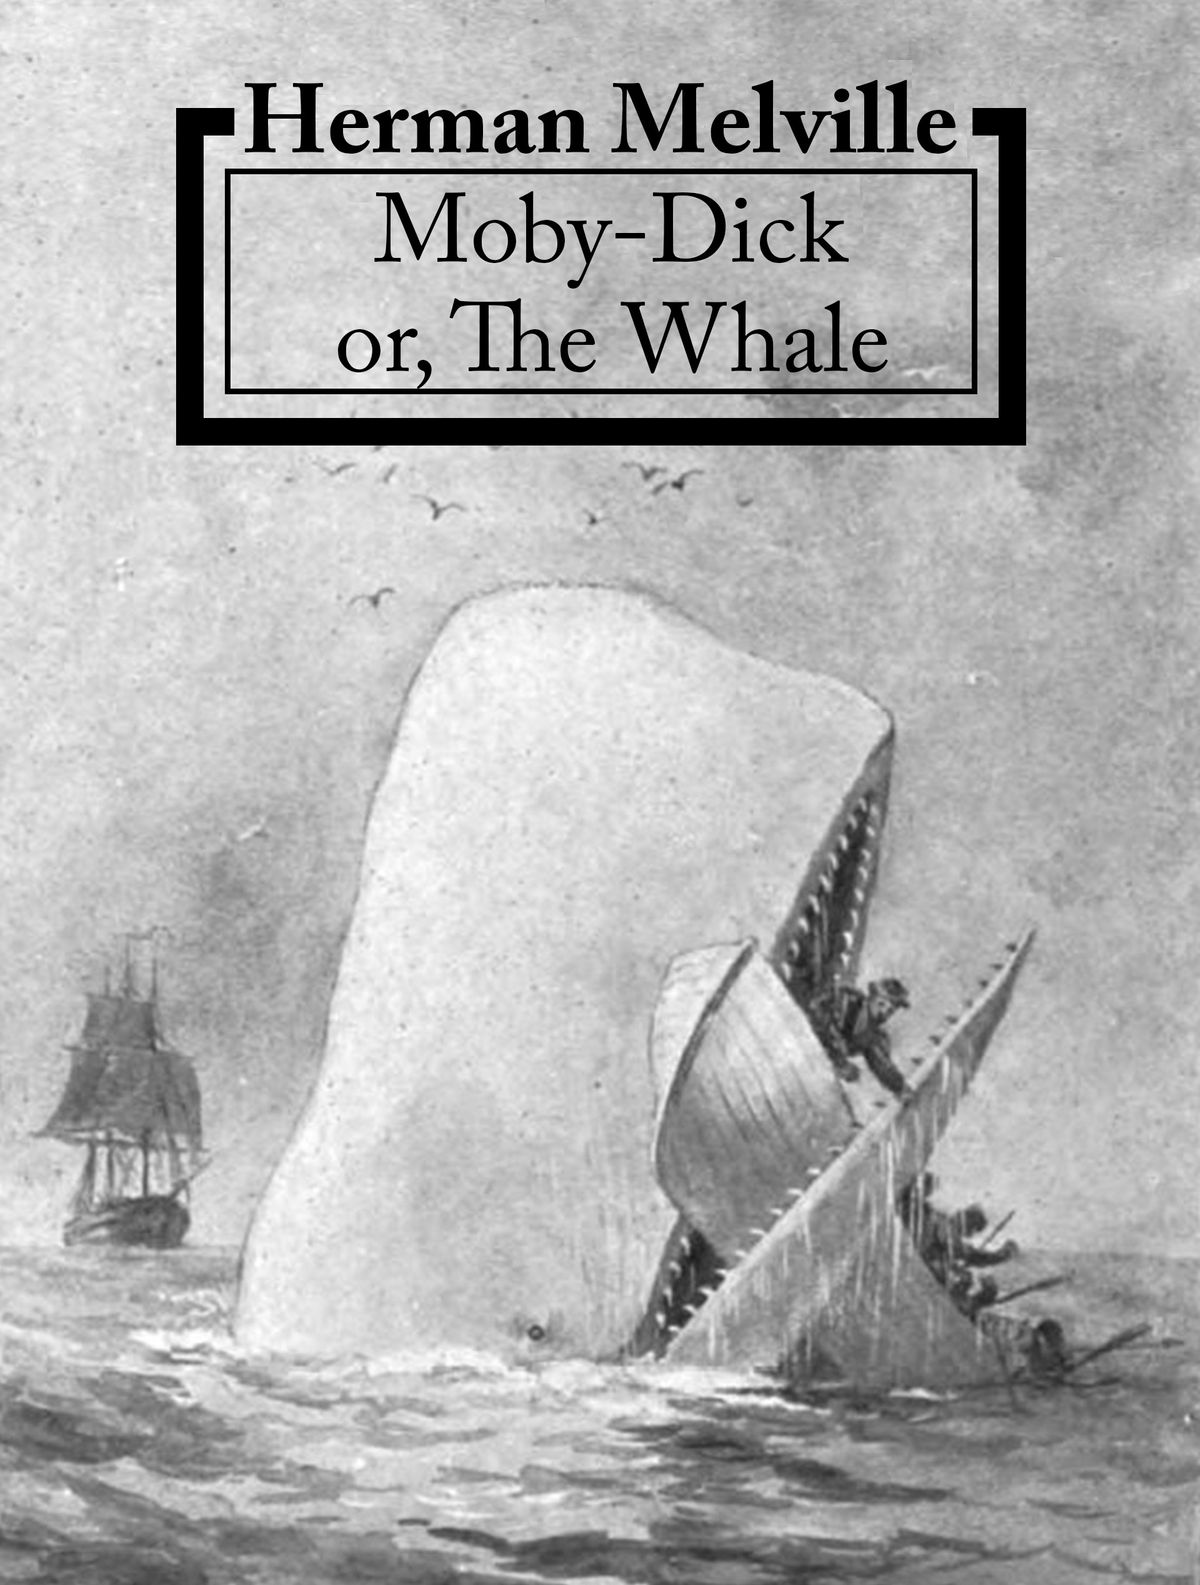 moby-dick-or-the-whale-22.jpg